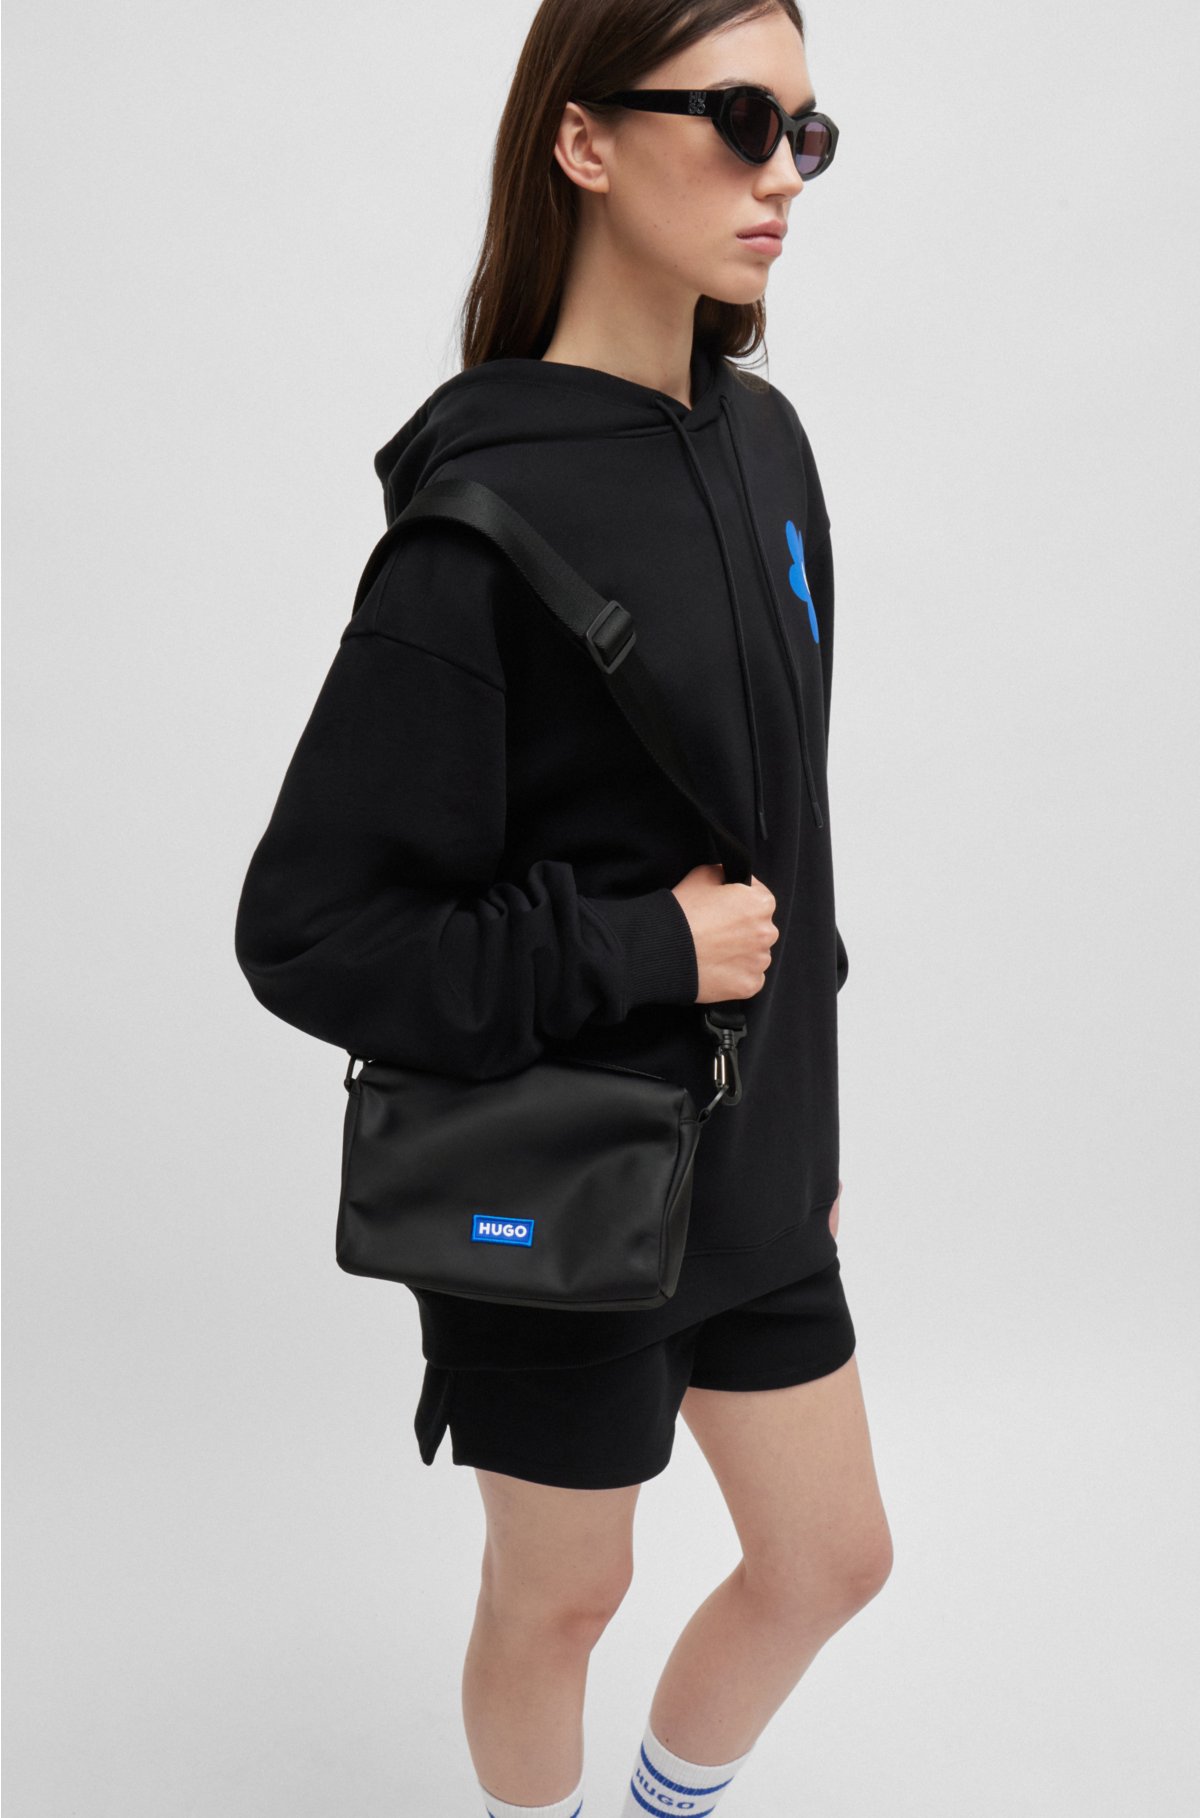 Crossbody bag in structured twill with blue logo trim, Black